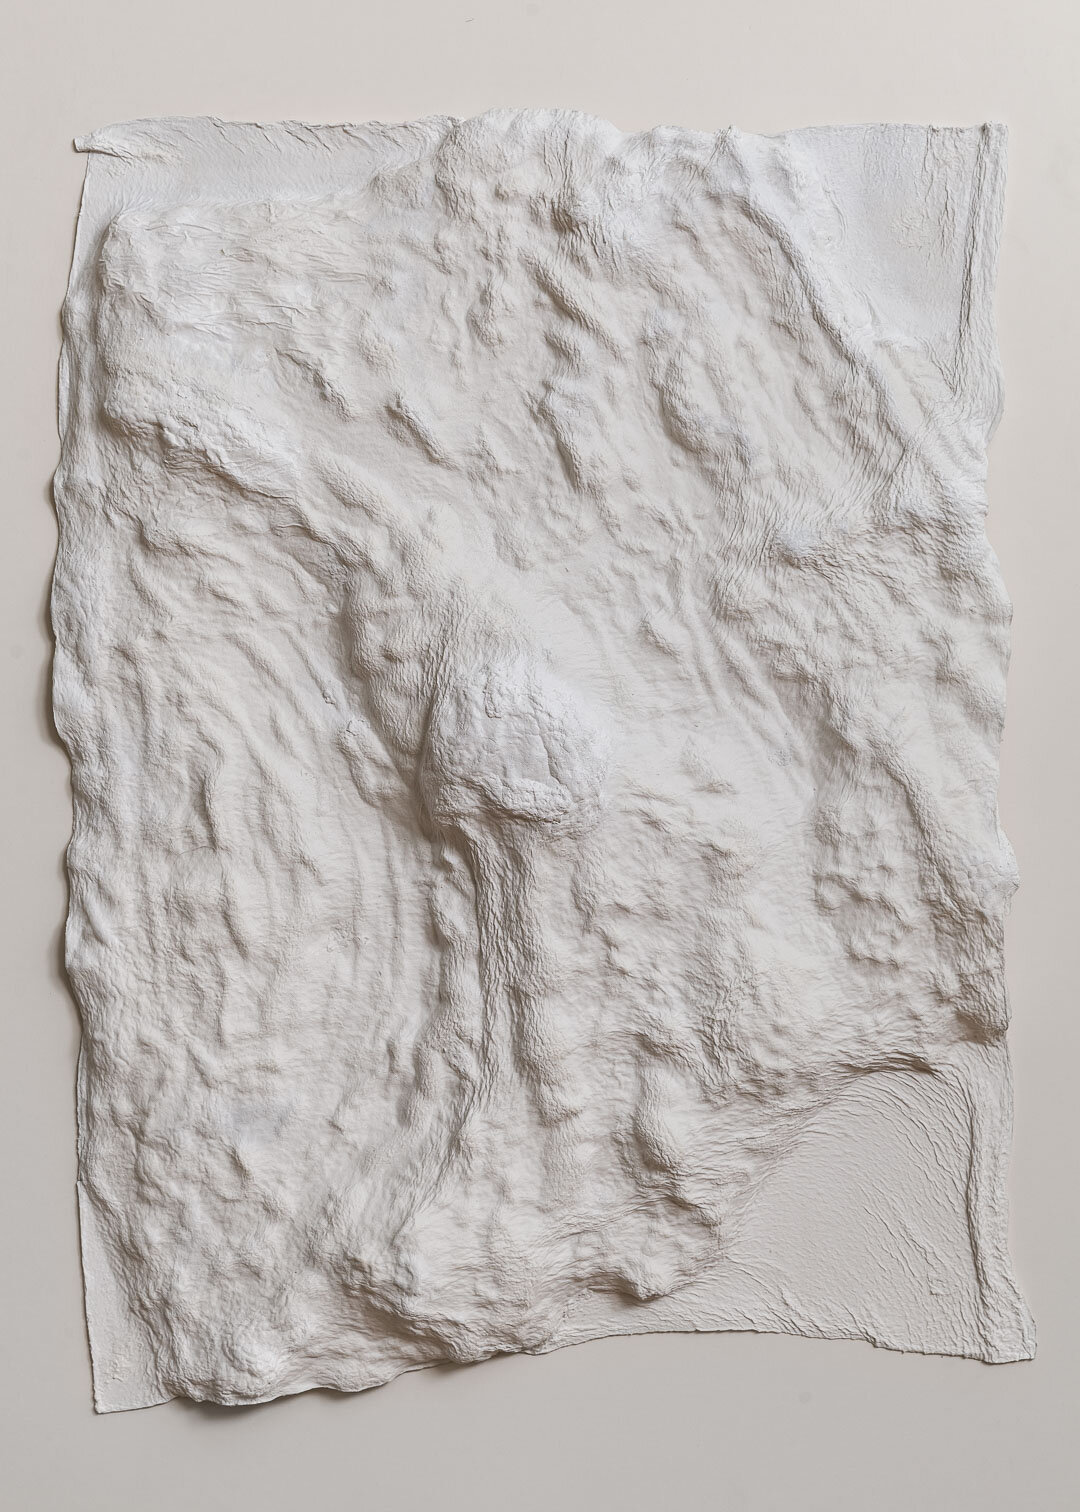   Jarrod Beck   Arctic Mountains, Svalbard 1 , 2015. Paper pulp. 40 x 30 x 2 inches. 